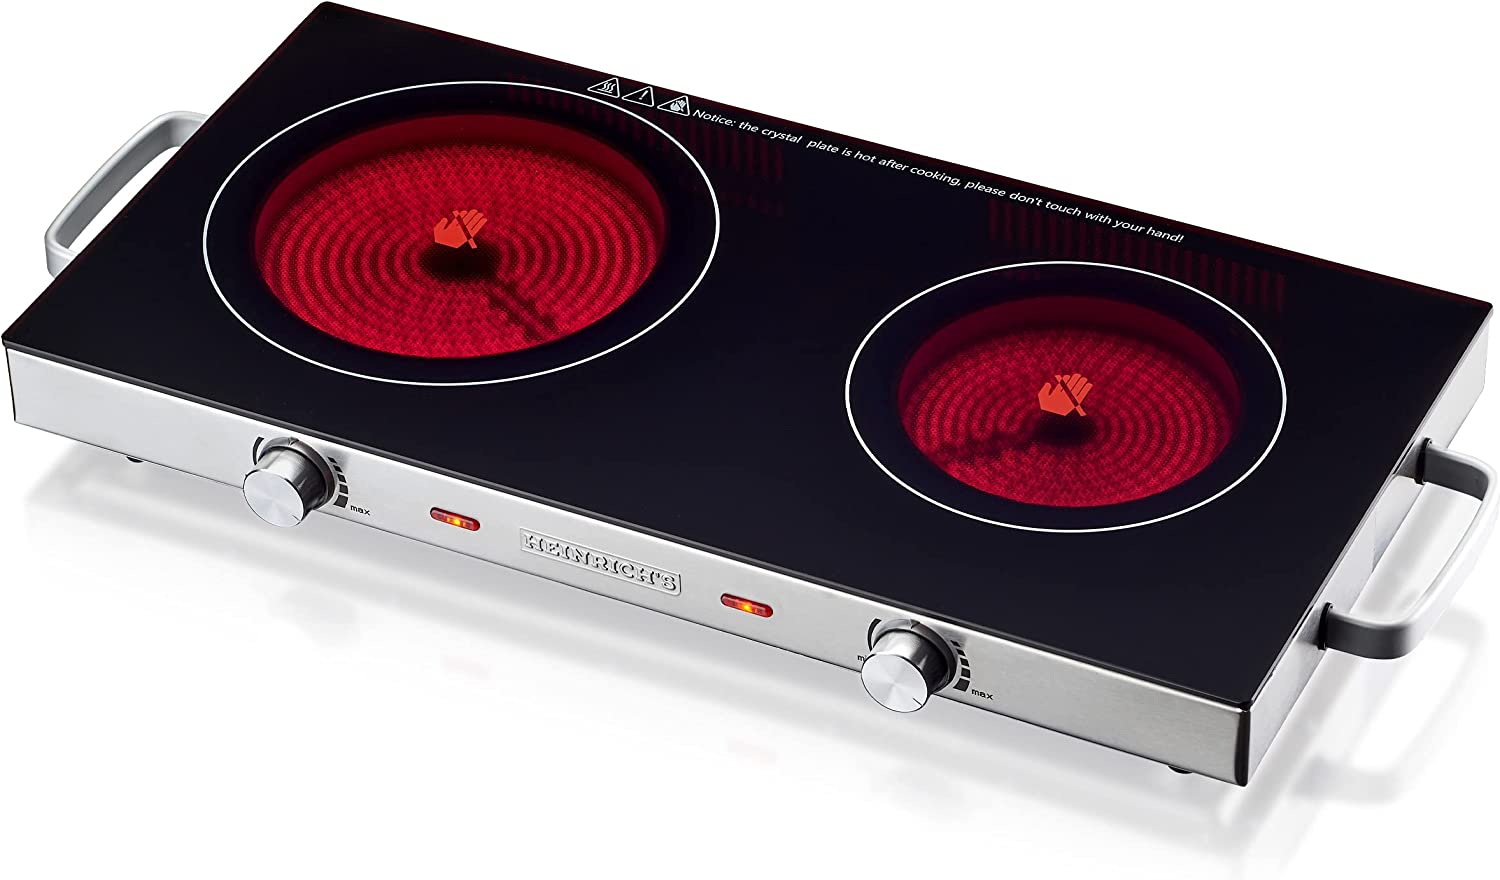 Heinrich´s Heinrichs Infrared Hob Glass Ceramic Double Hob with Infrared Heat, 2 x Electric Hobs Suitable for All Pots and Pans 2800 W Camping/Office/Kitchen/Outdoor/Single